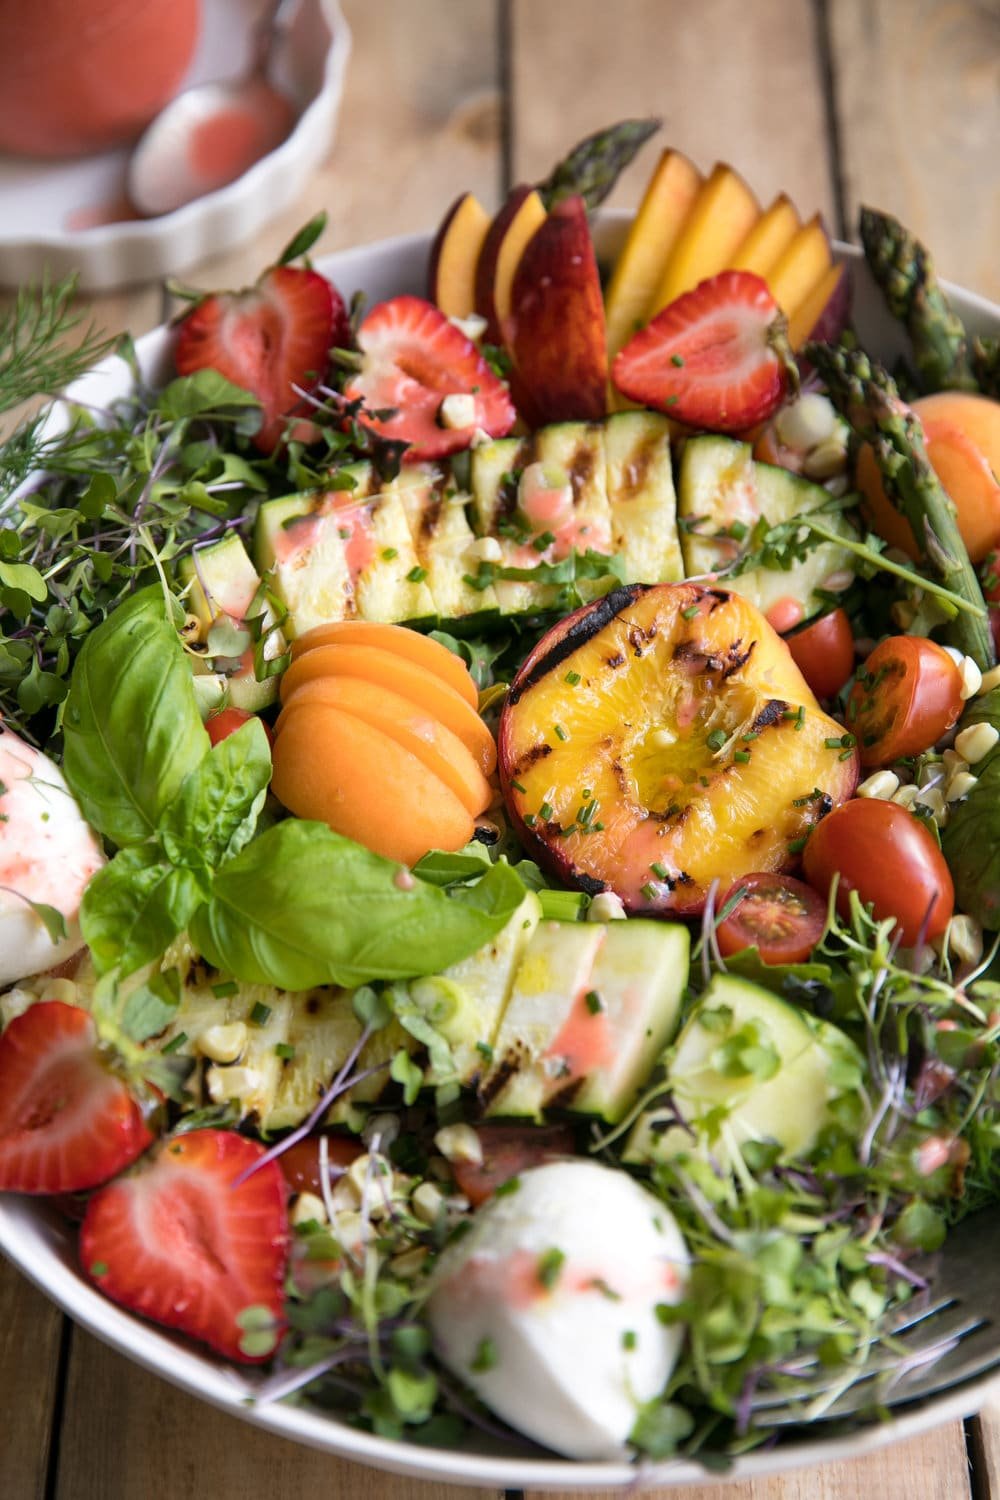 Grilled Peach, Corn, Zucchini and Asparagus Summer Salad with Strawberry Vinaigrette